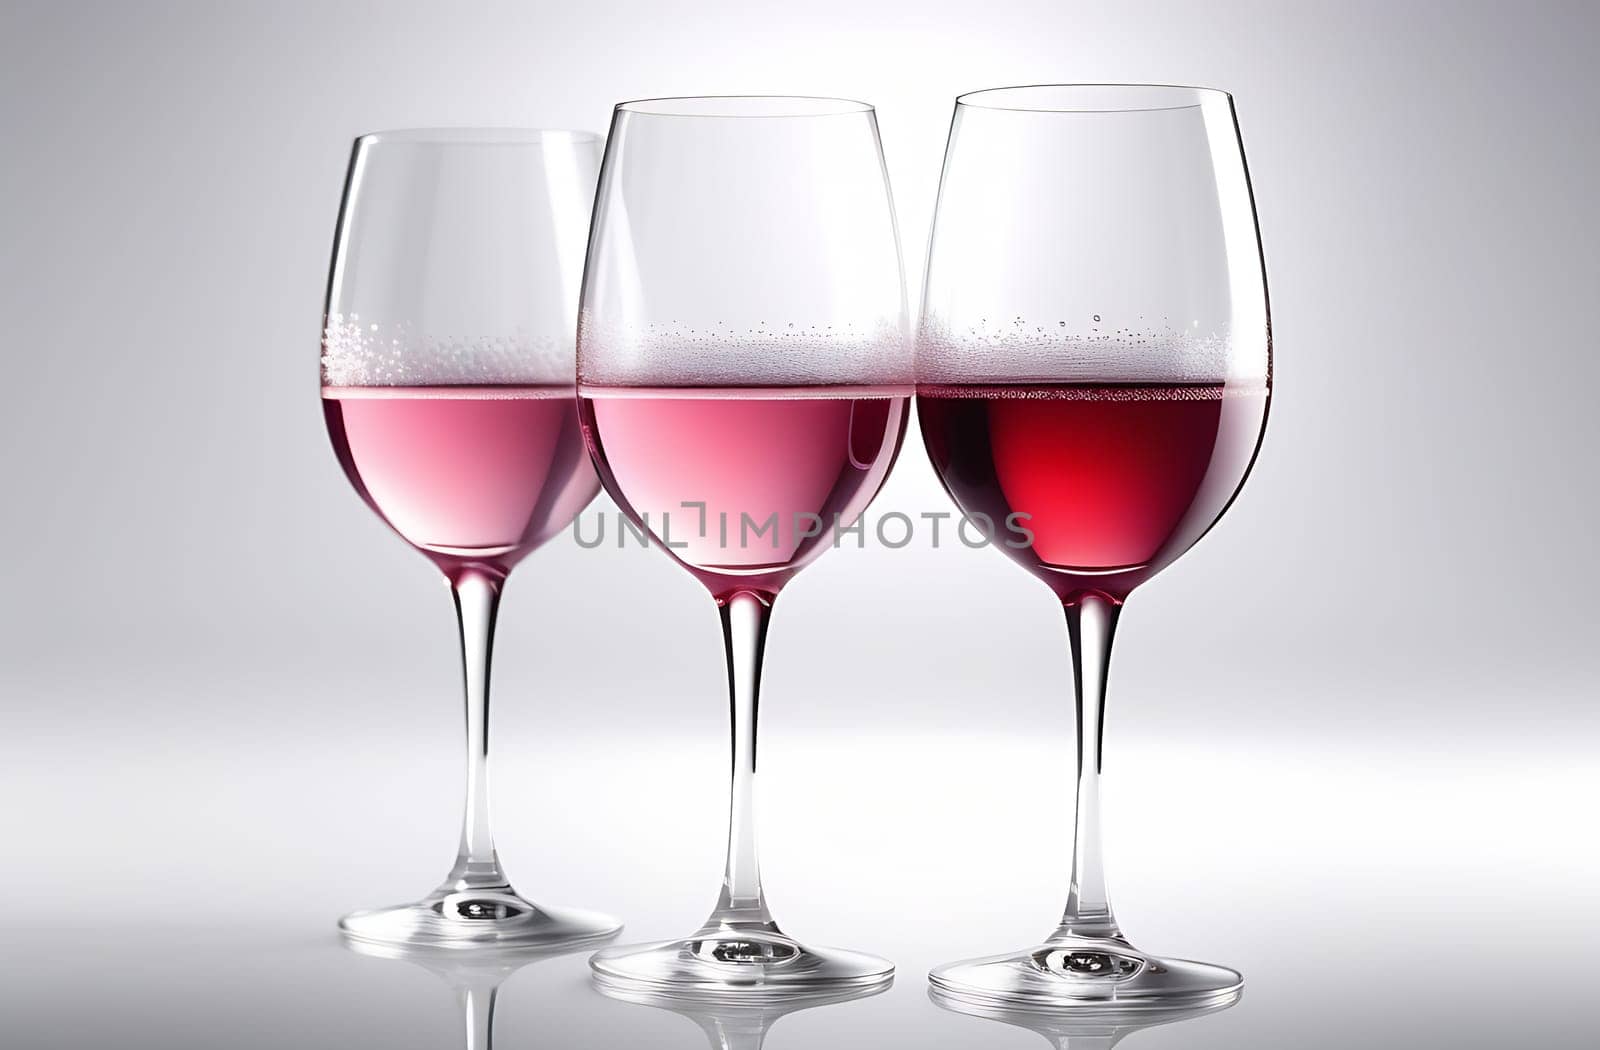 Three thin wine glasses half filled with pink sparkling wine with bubbles, close-up shots by claire_lucia